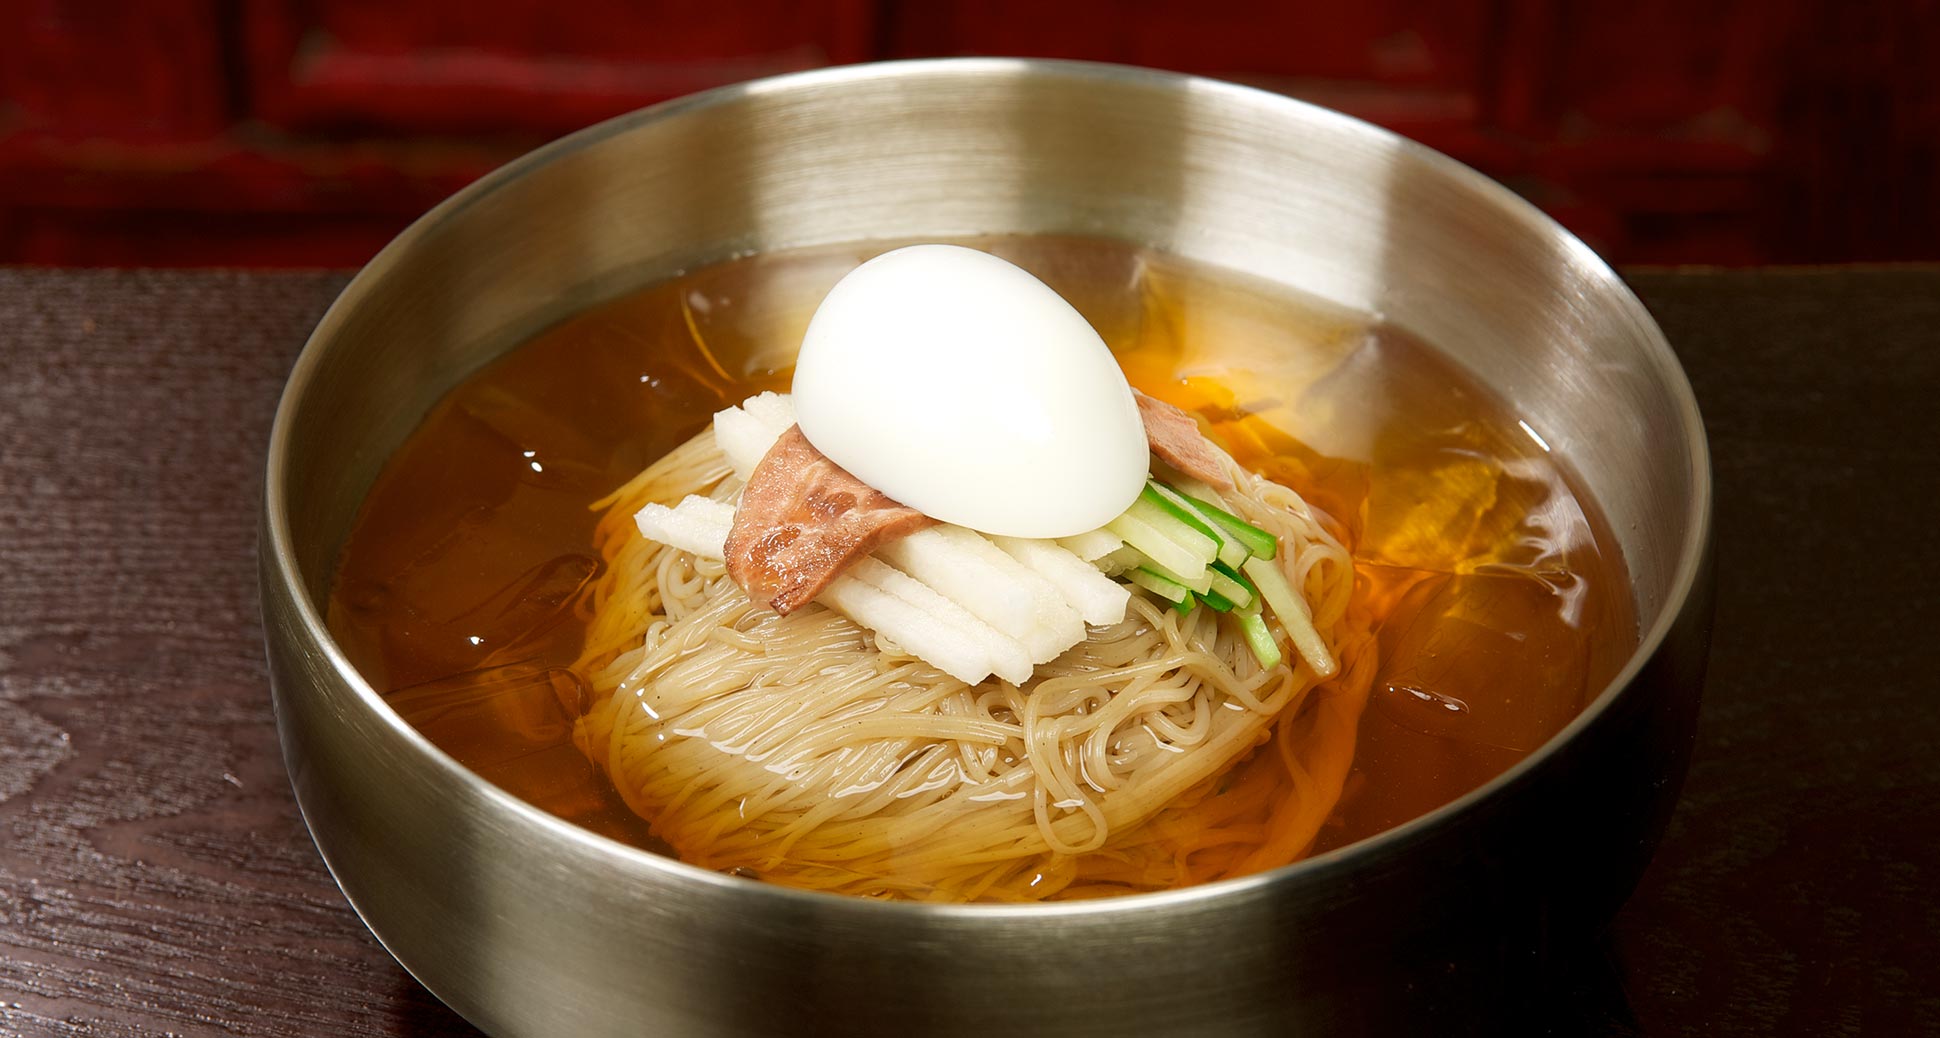 Korean meals for those sizzling hot summer days